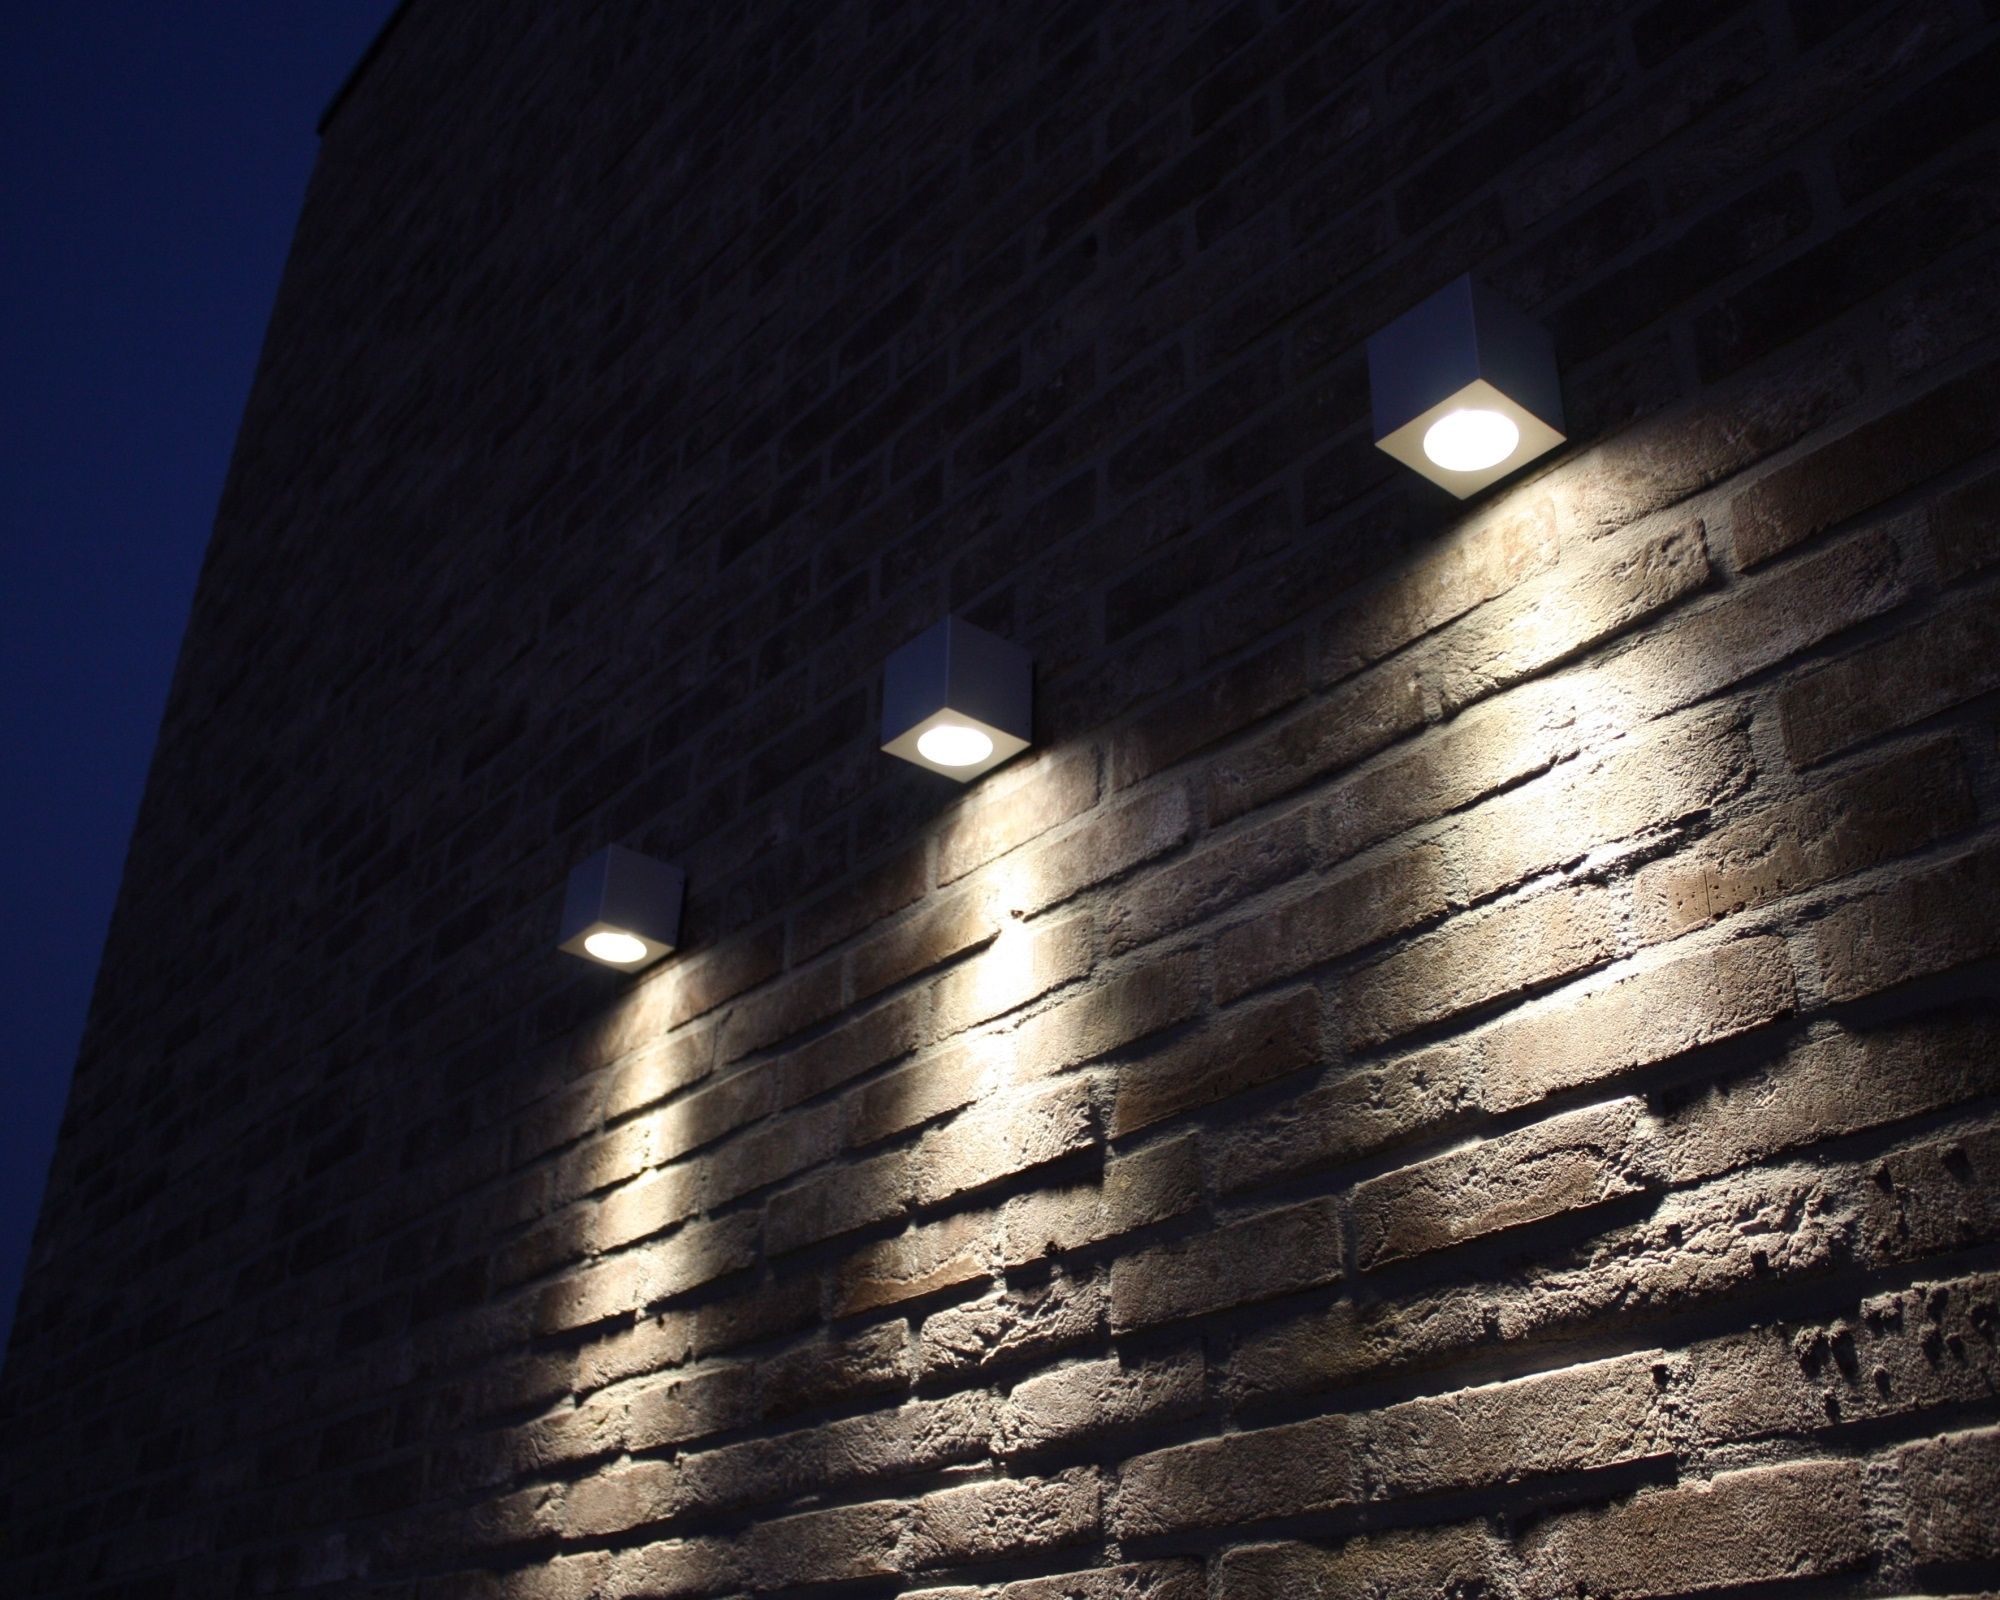 Outdoor Wall Mounted Led Lighting For Red Exposed Brick Wall Ideas Throughout Outdoor Wall Led Lighting (View 13 of 15)